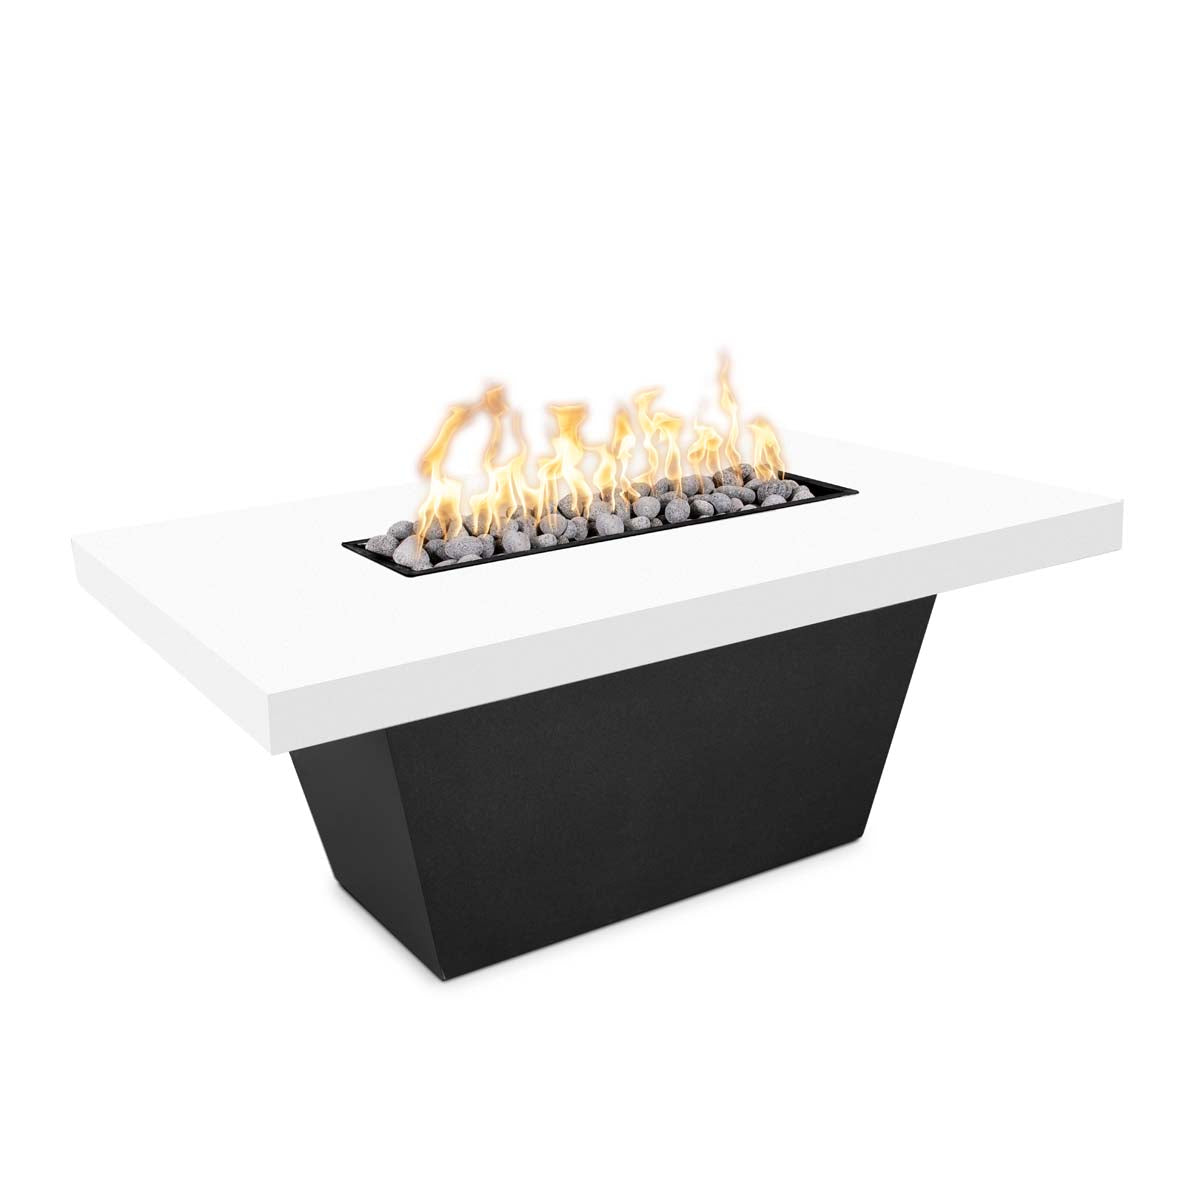 The Outdoor Plus Tacoma 48" Black & White Powder Coated Metal Liquid Propane Fire Table with Match Lit Ignition